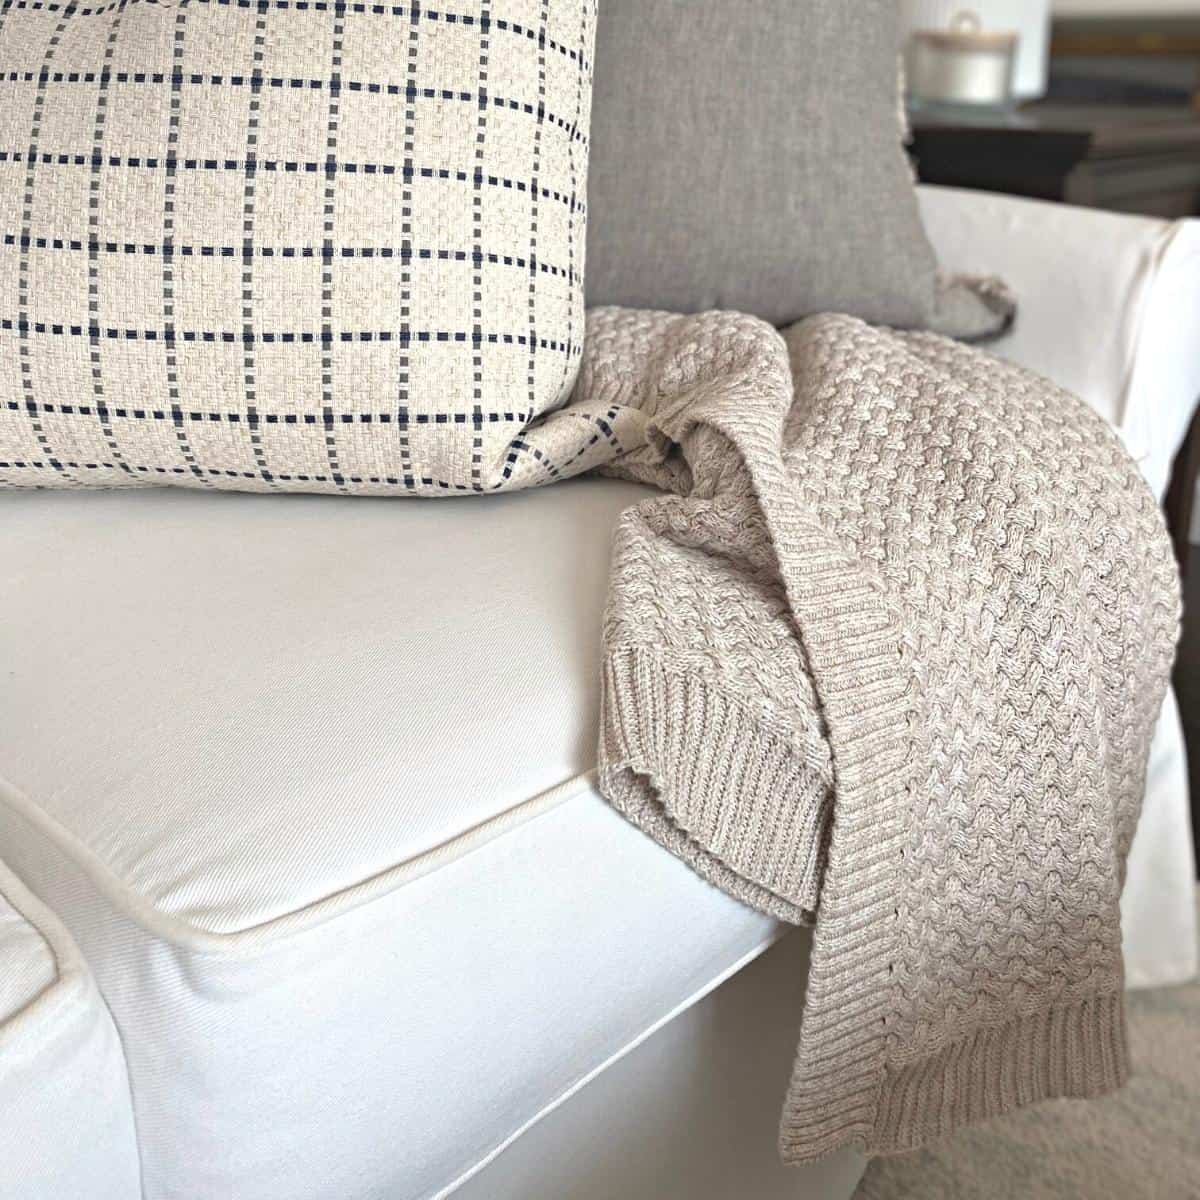 Oatmeal colored cable knit blanket draped over a white sofa with two large pillows on top